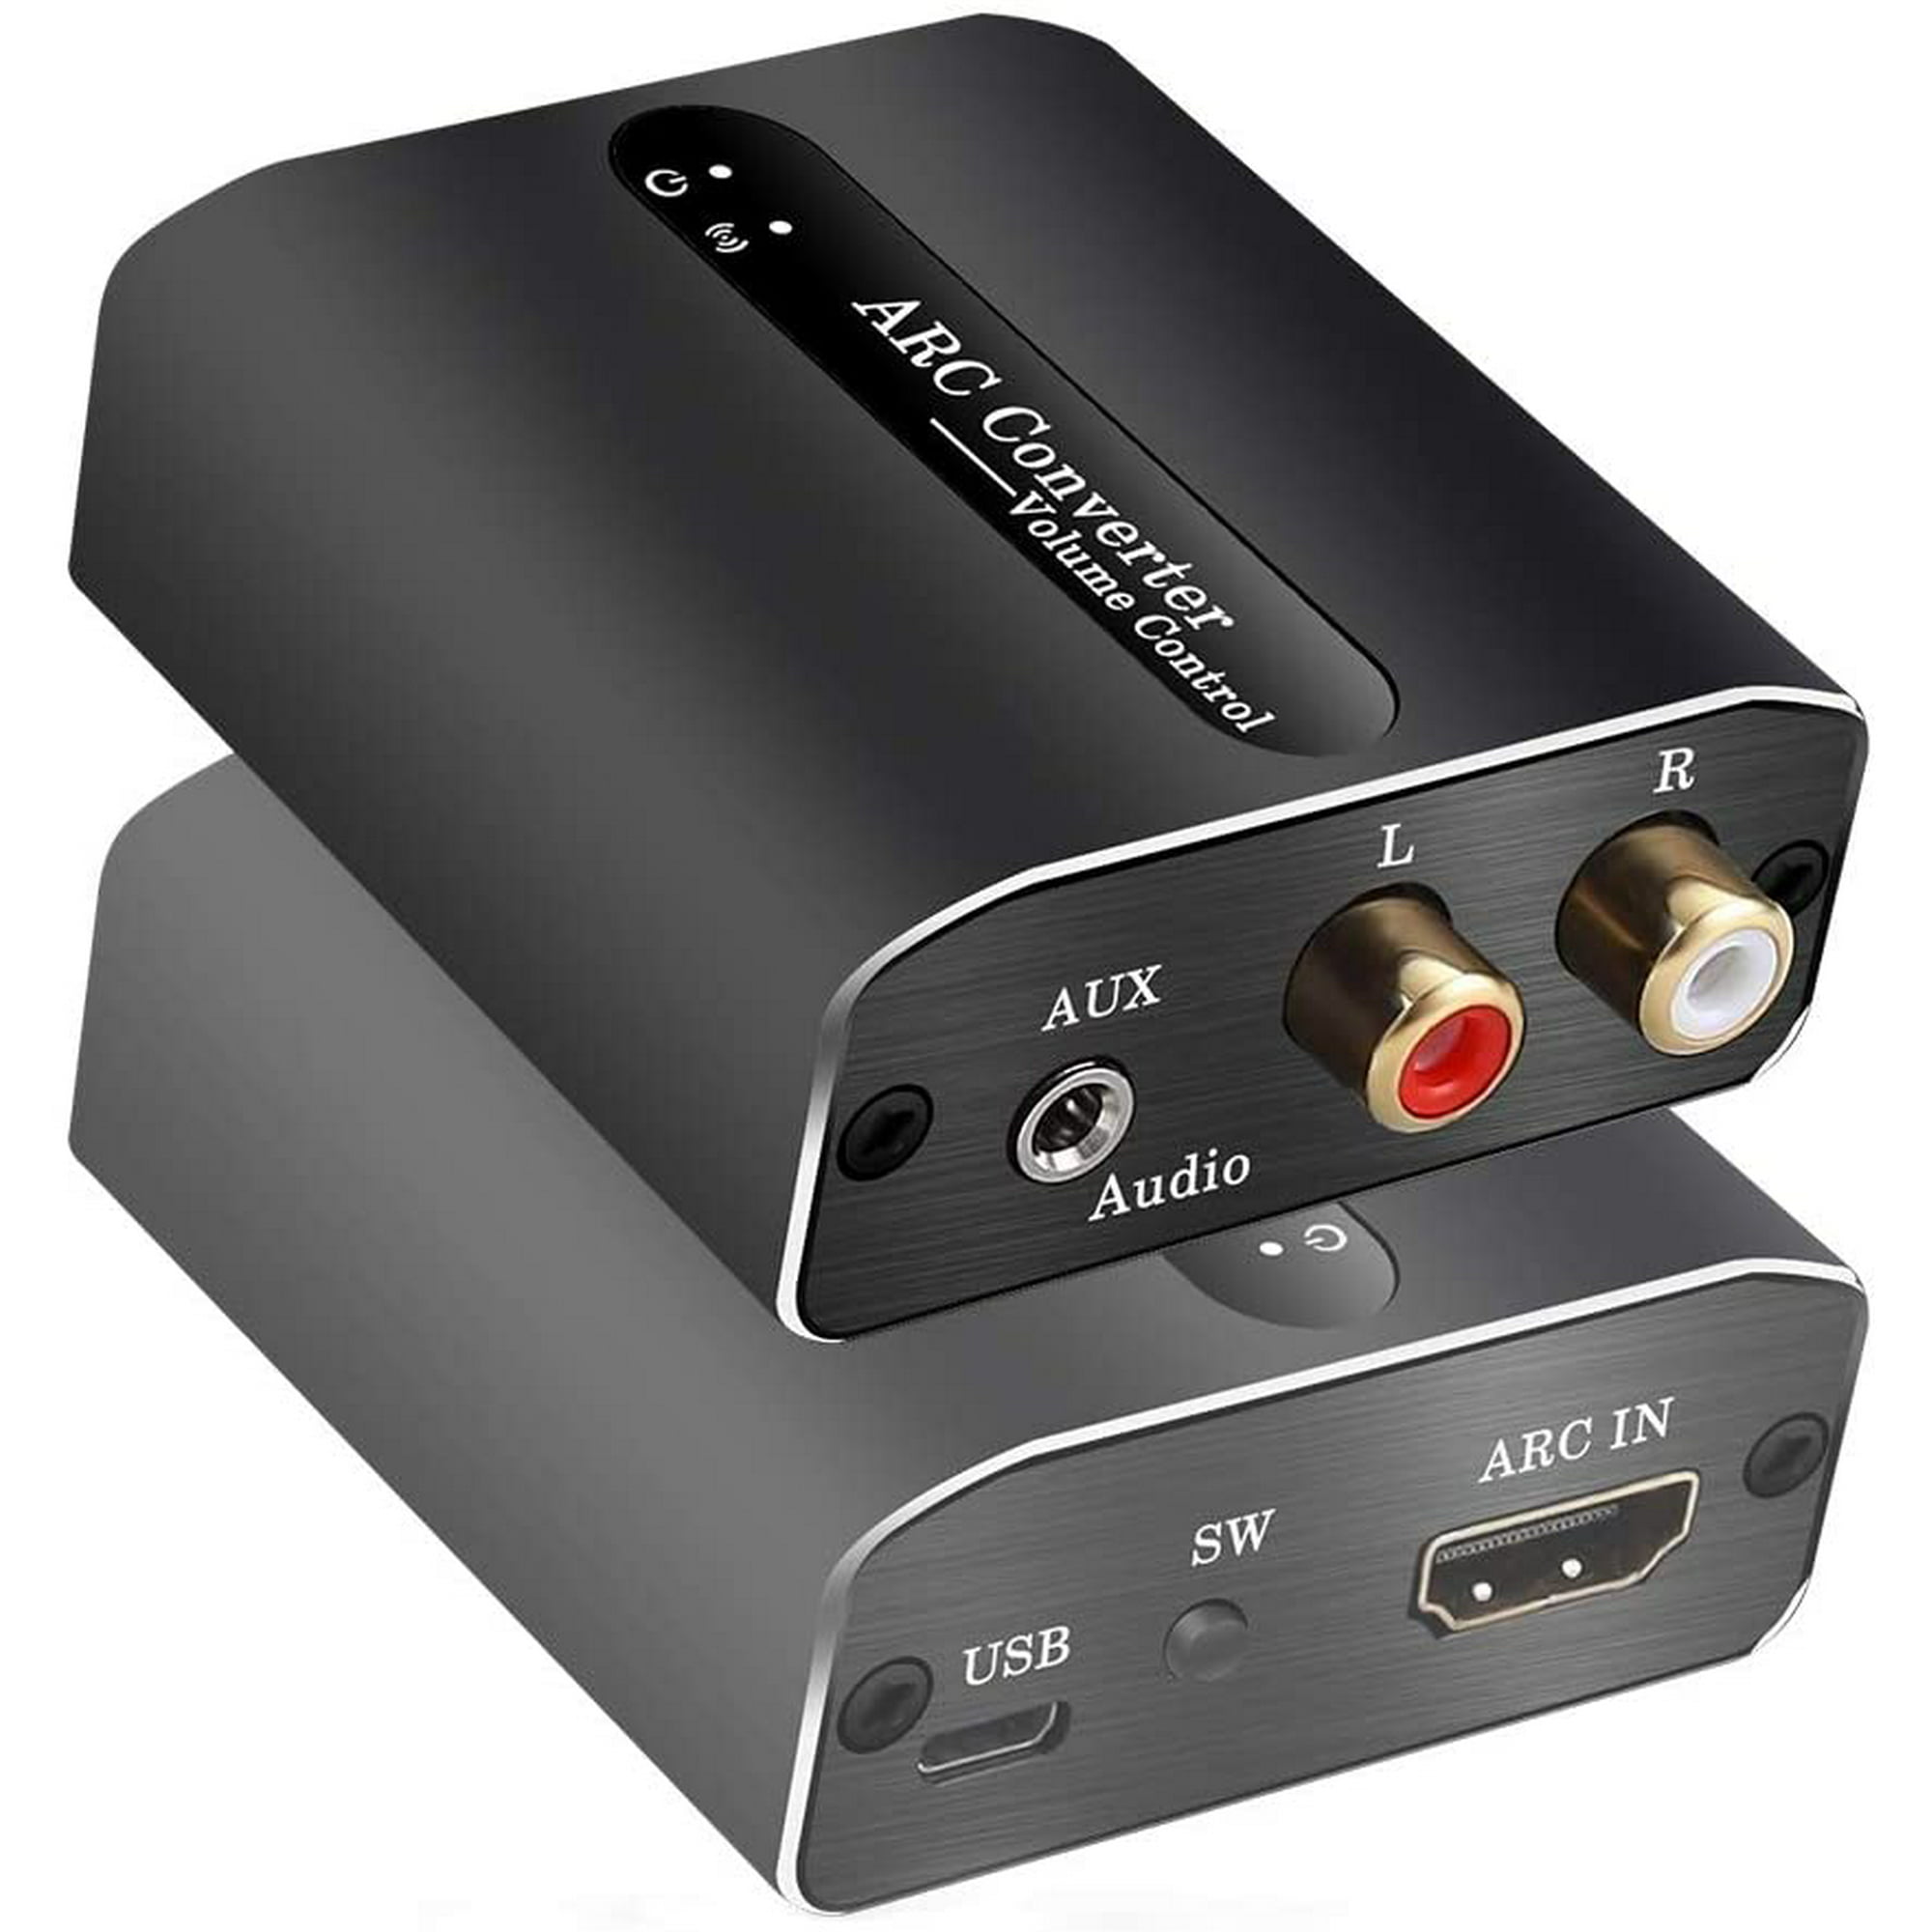 Volume Remote Adjustment (Digital to Analog Converter), Tiancai HDMI ARC to Stereo R/L RCA and 3.5 mm Jack Adapter, Compatible with Amplifier Headphone Speaker, Multi-Ports Output Simultaneously | Walmart Canada